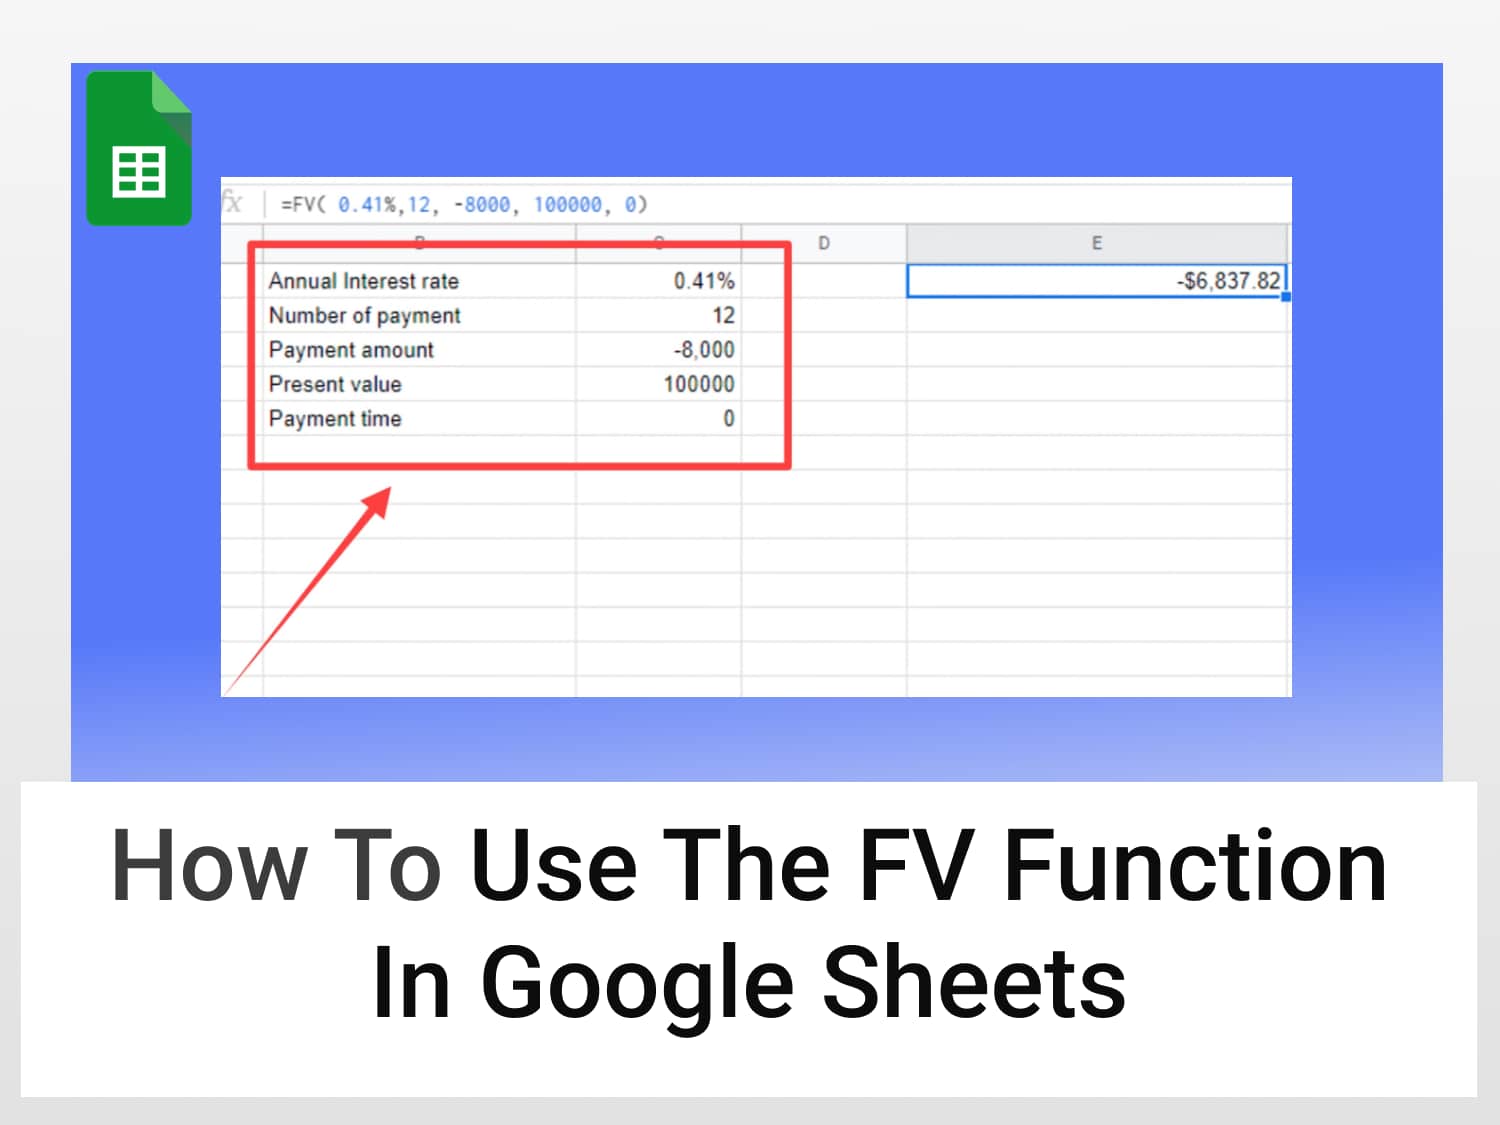 How to use the FV function in Google Sheets